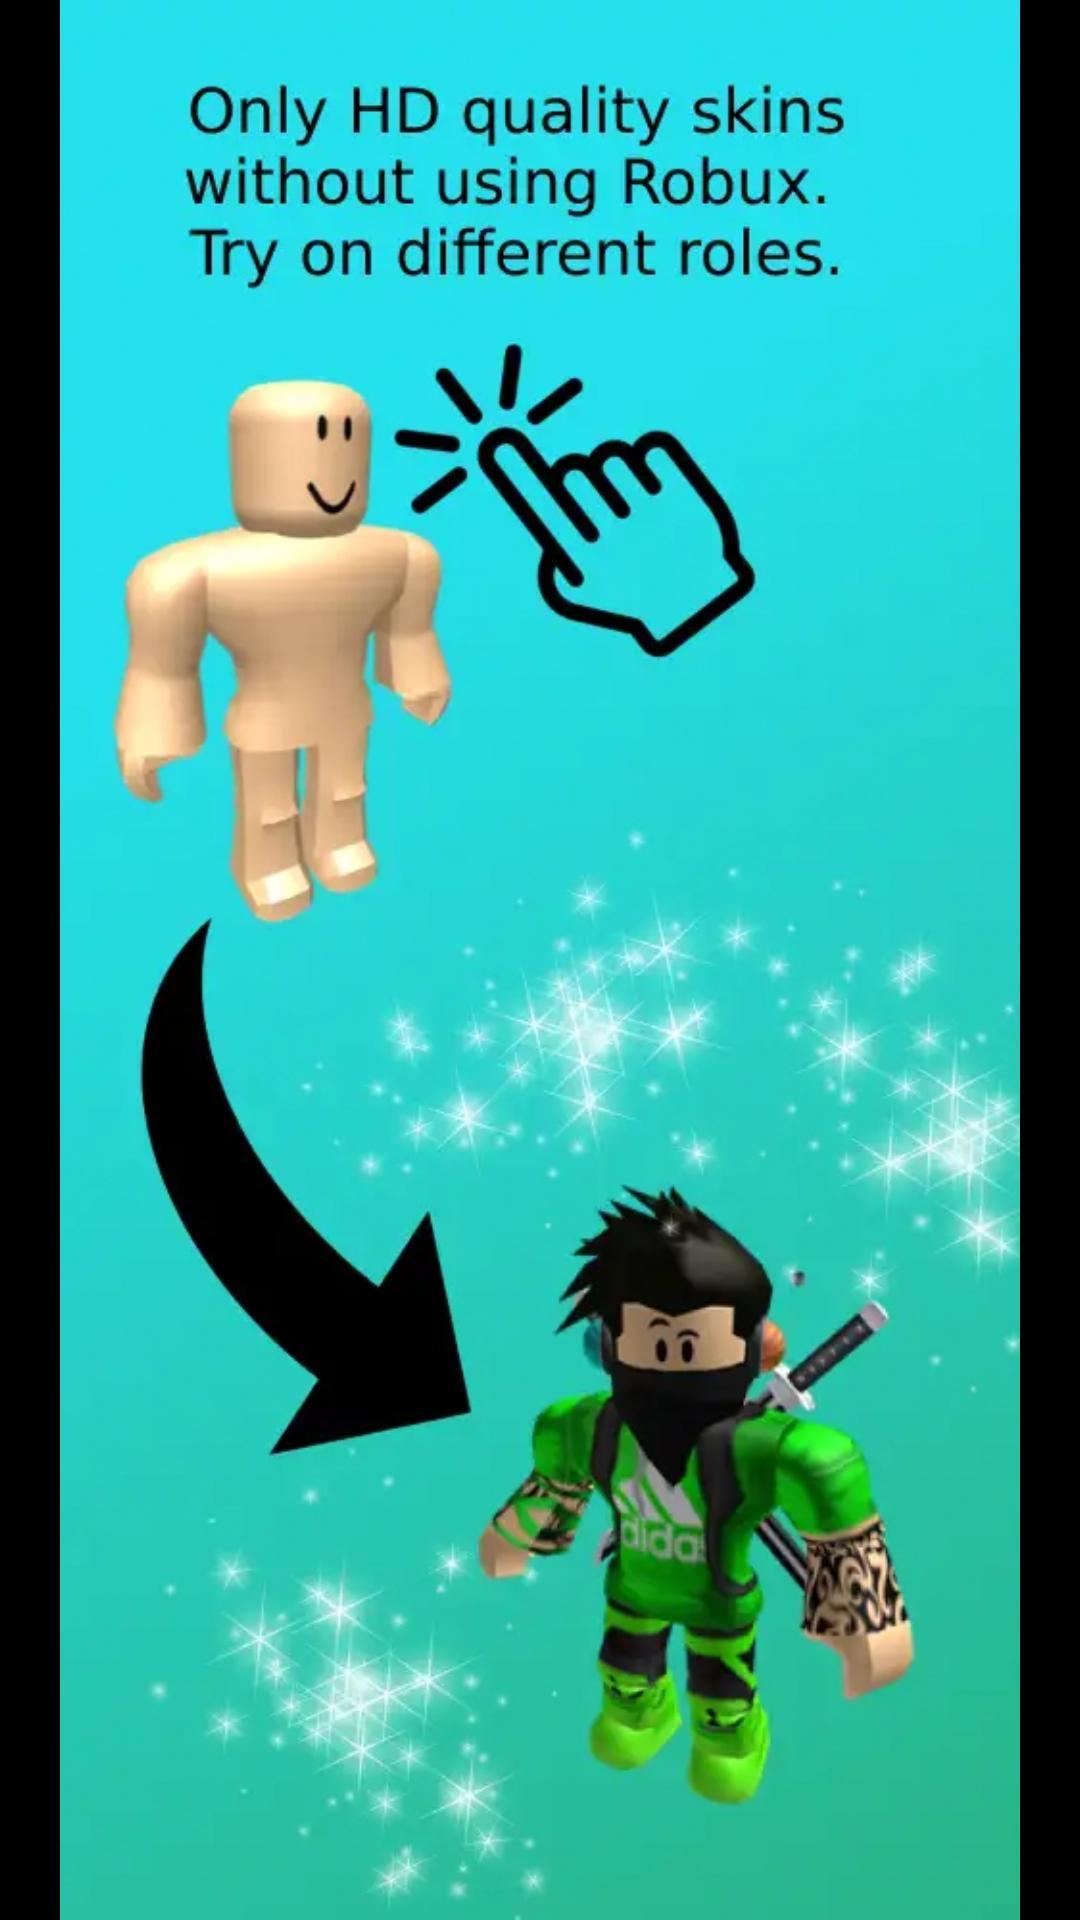 Free Roblox Accounts 2021 With Robux